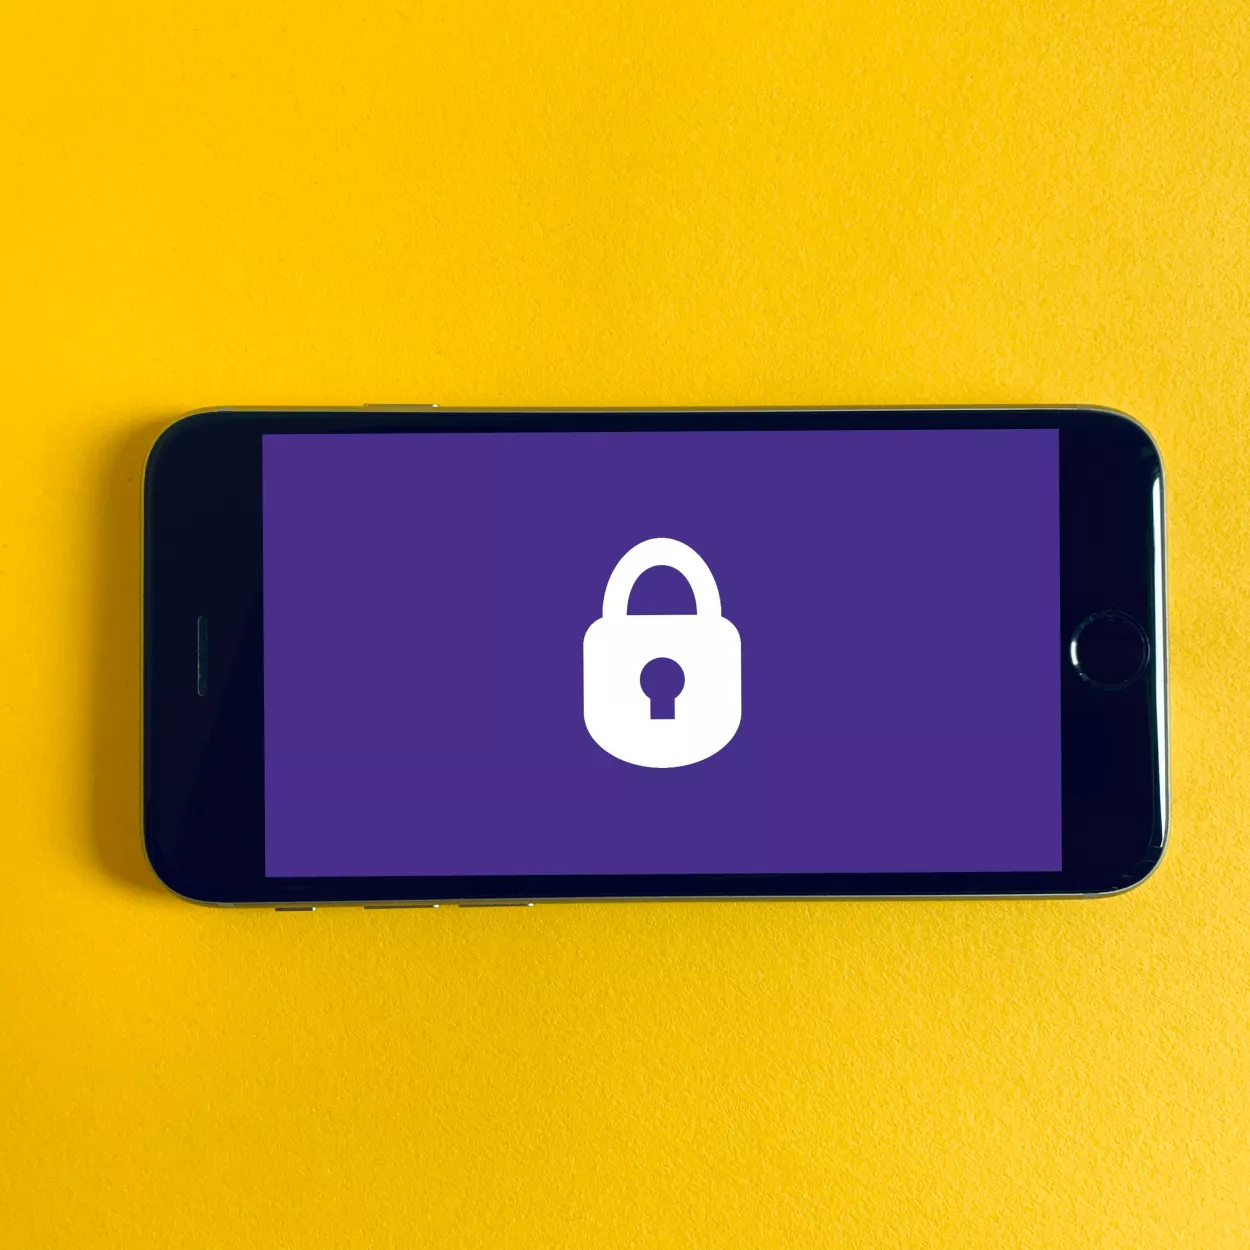 An iPhone, which is photographed against a yellow background, displays a white padlock on a purple screen.